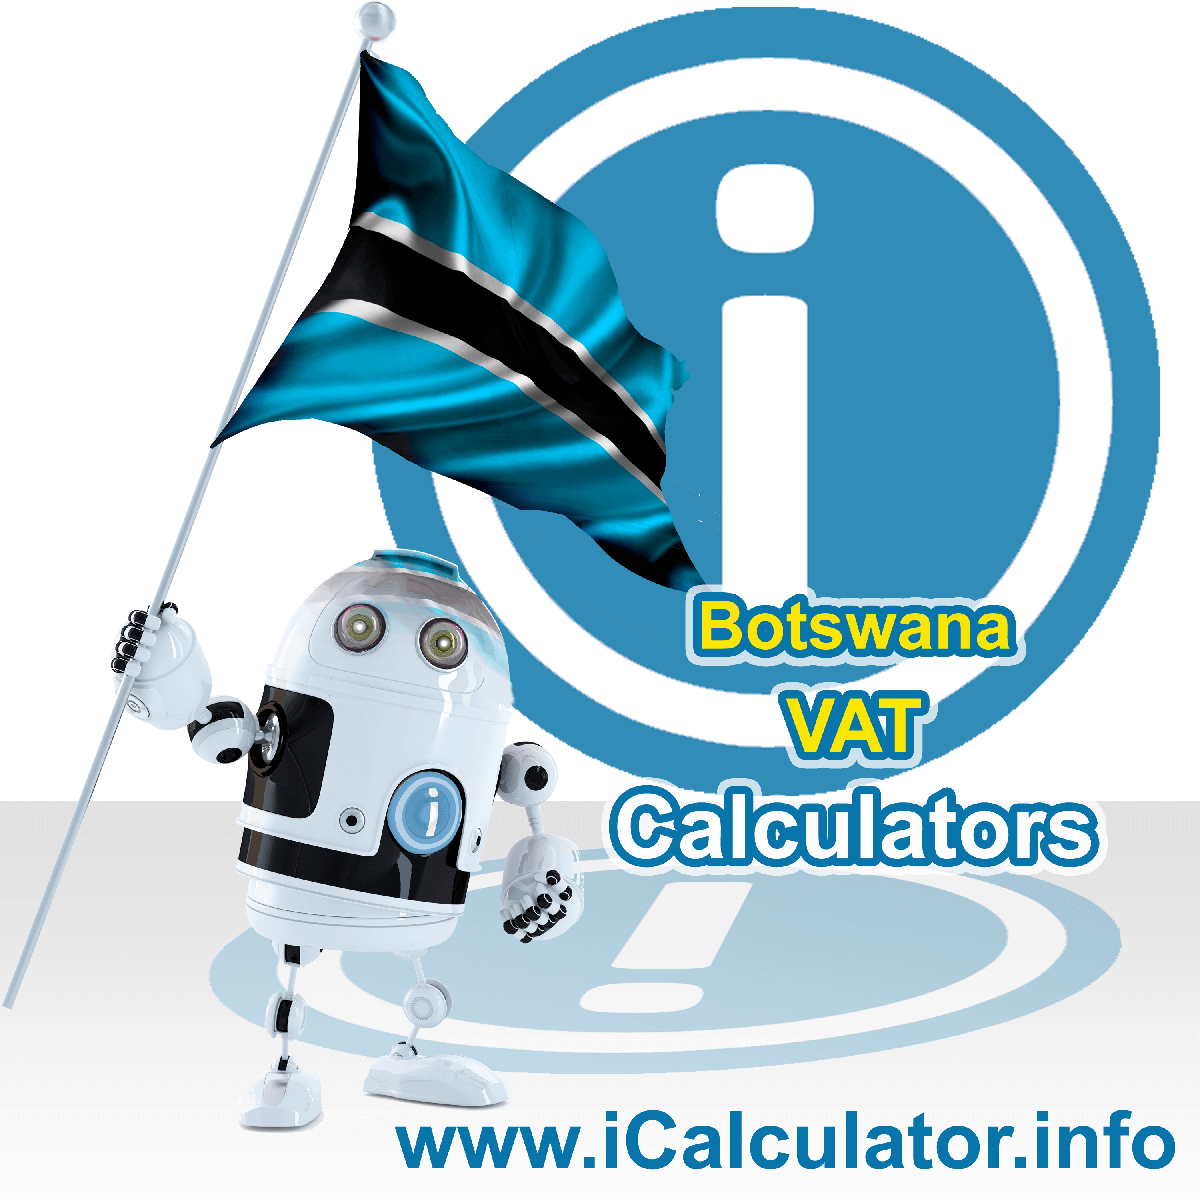 Botswana VAT Calculator. This image shows the Botswana flag and information relating to the VAT formula used for calculating Value Added Tax in Botswana using the Botswana VAT Calculator in 2023